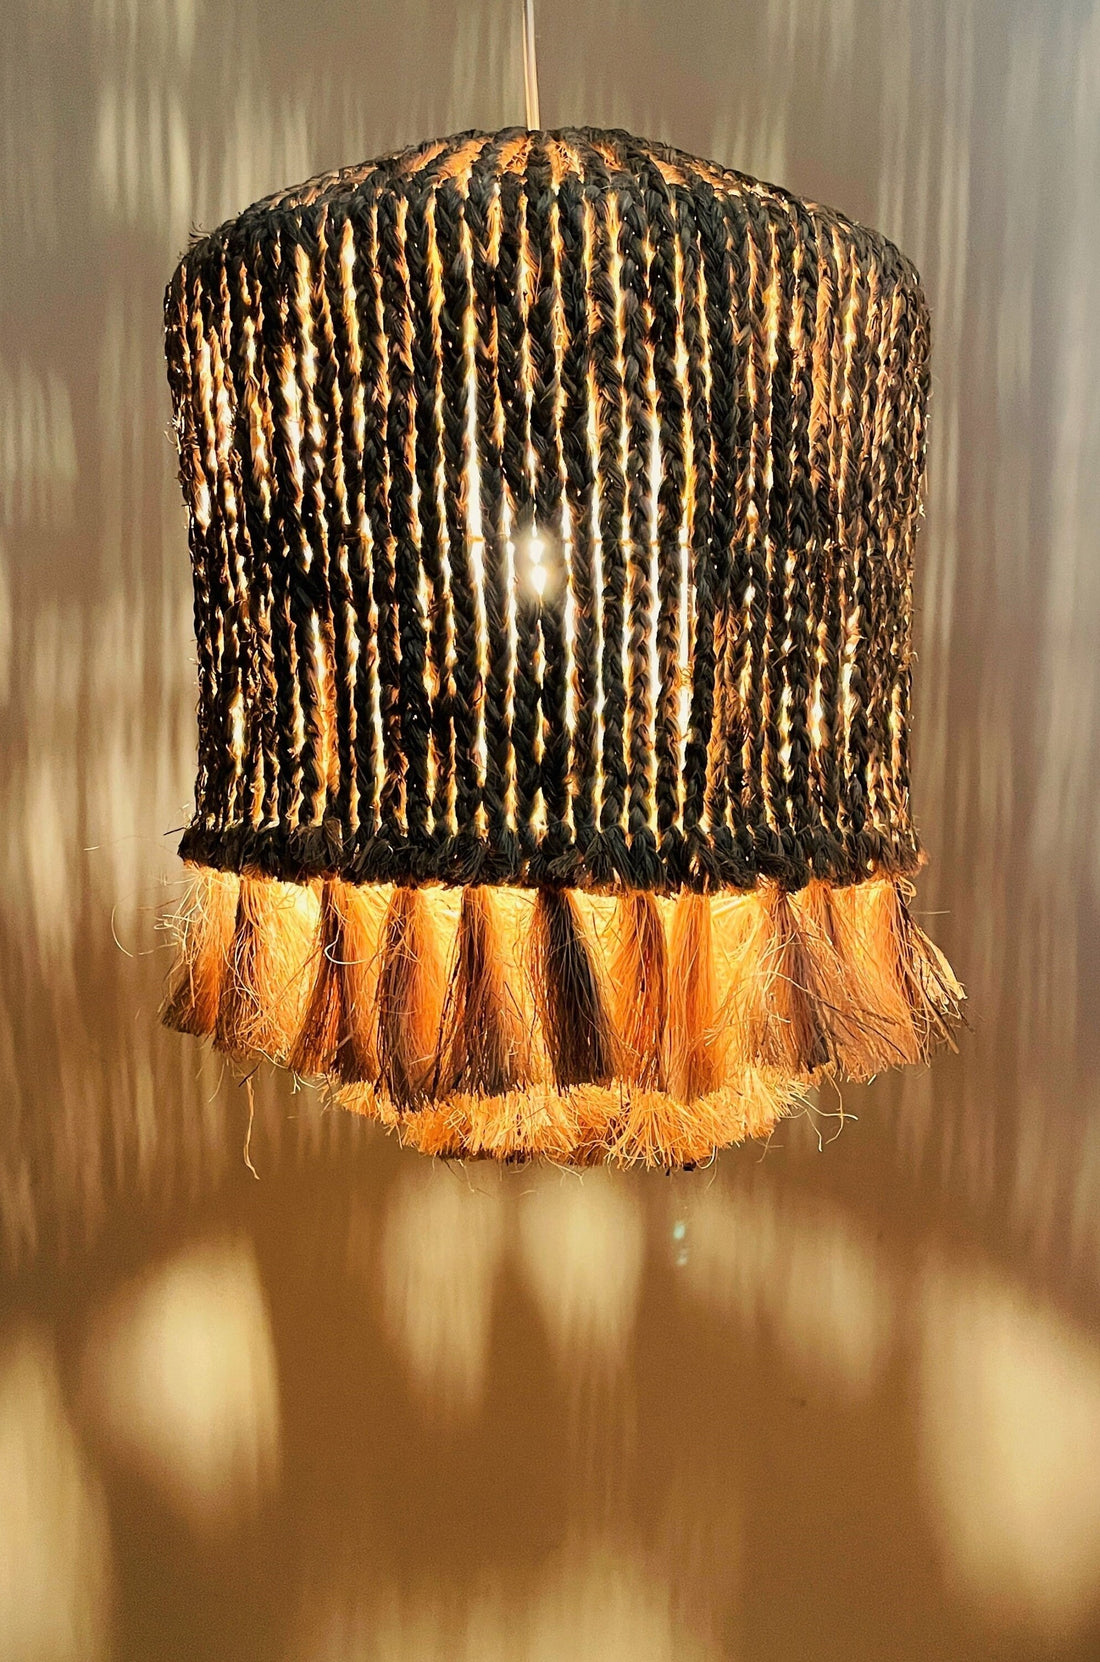 Seagrass Straw Lampshade Handcrafted by Vietnamese Artisans, Sustainable Eco Friendly Lighting, Pendant Light, Chandelier, Lampshade